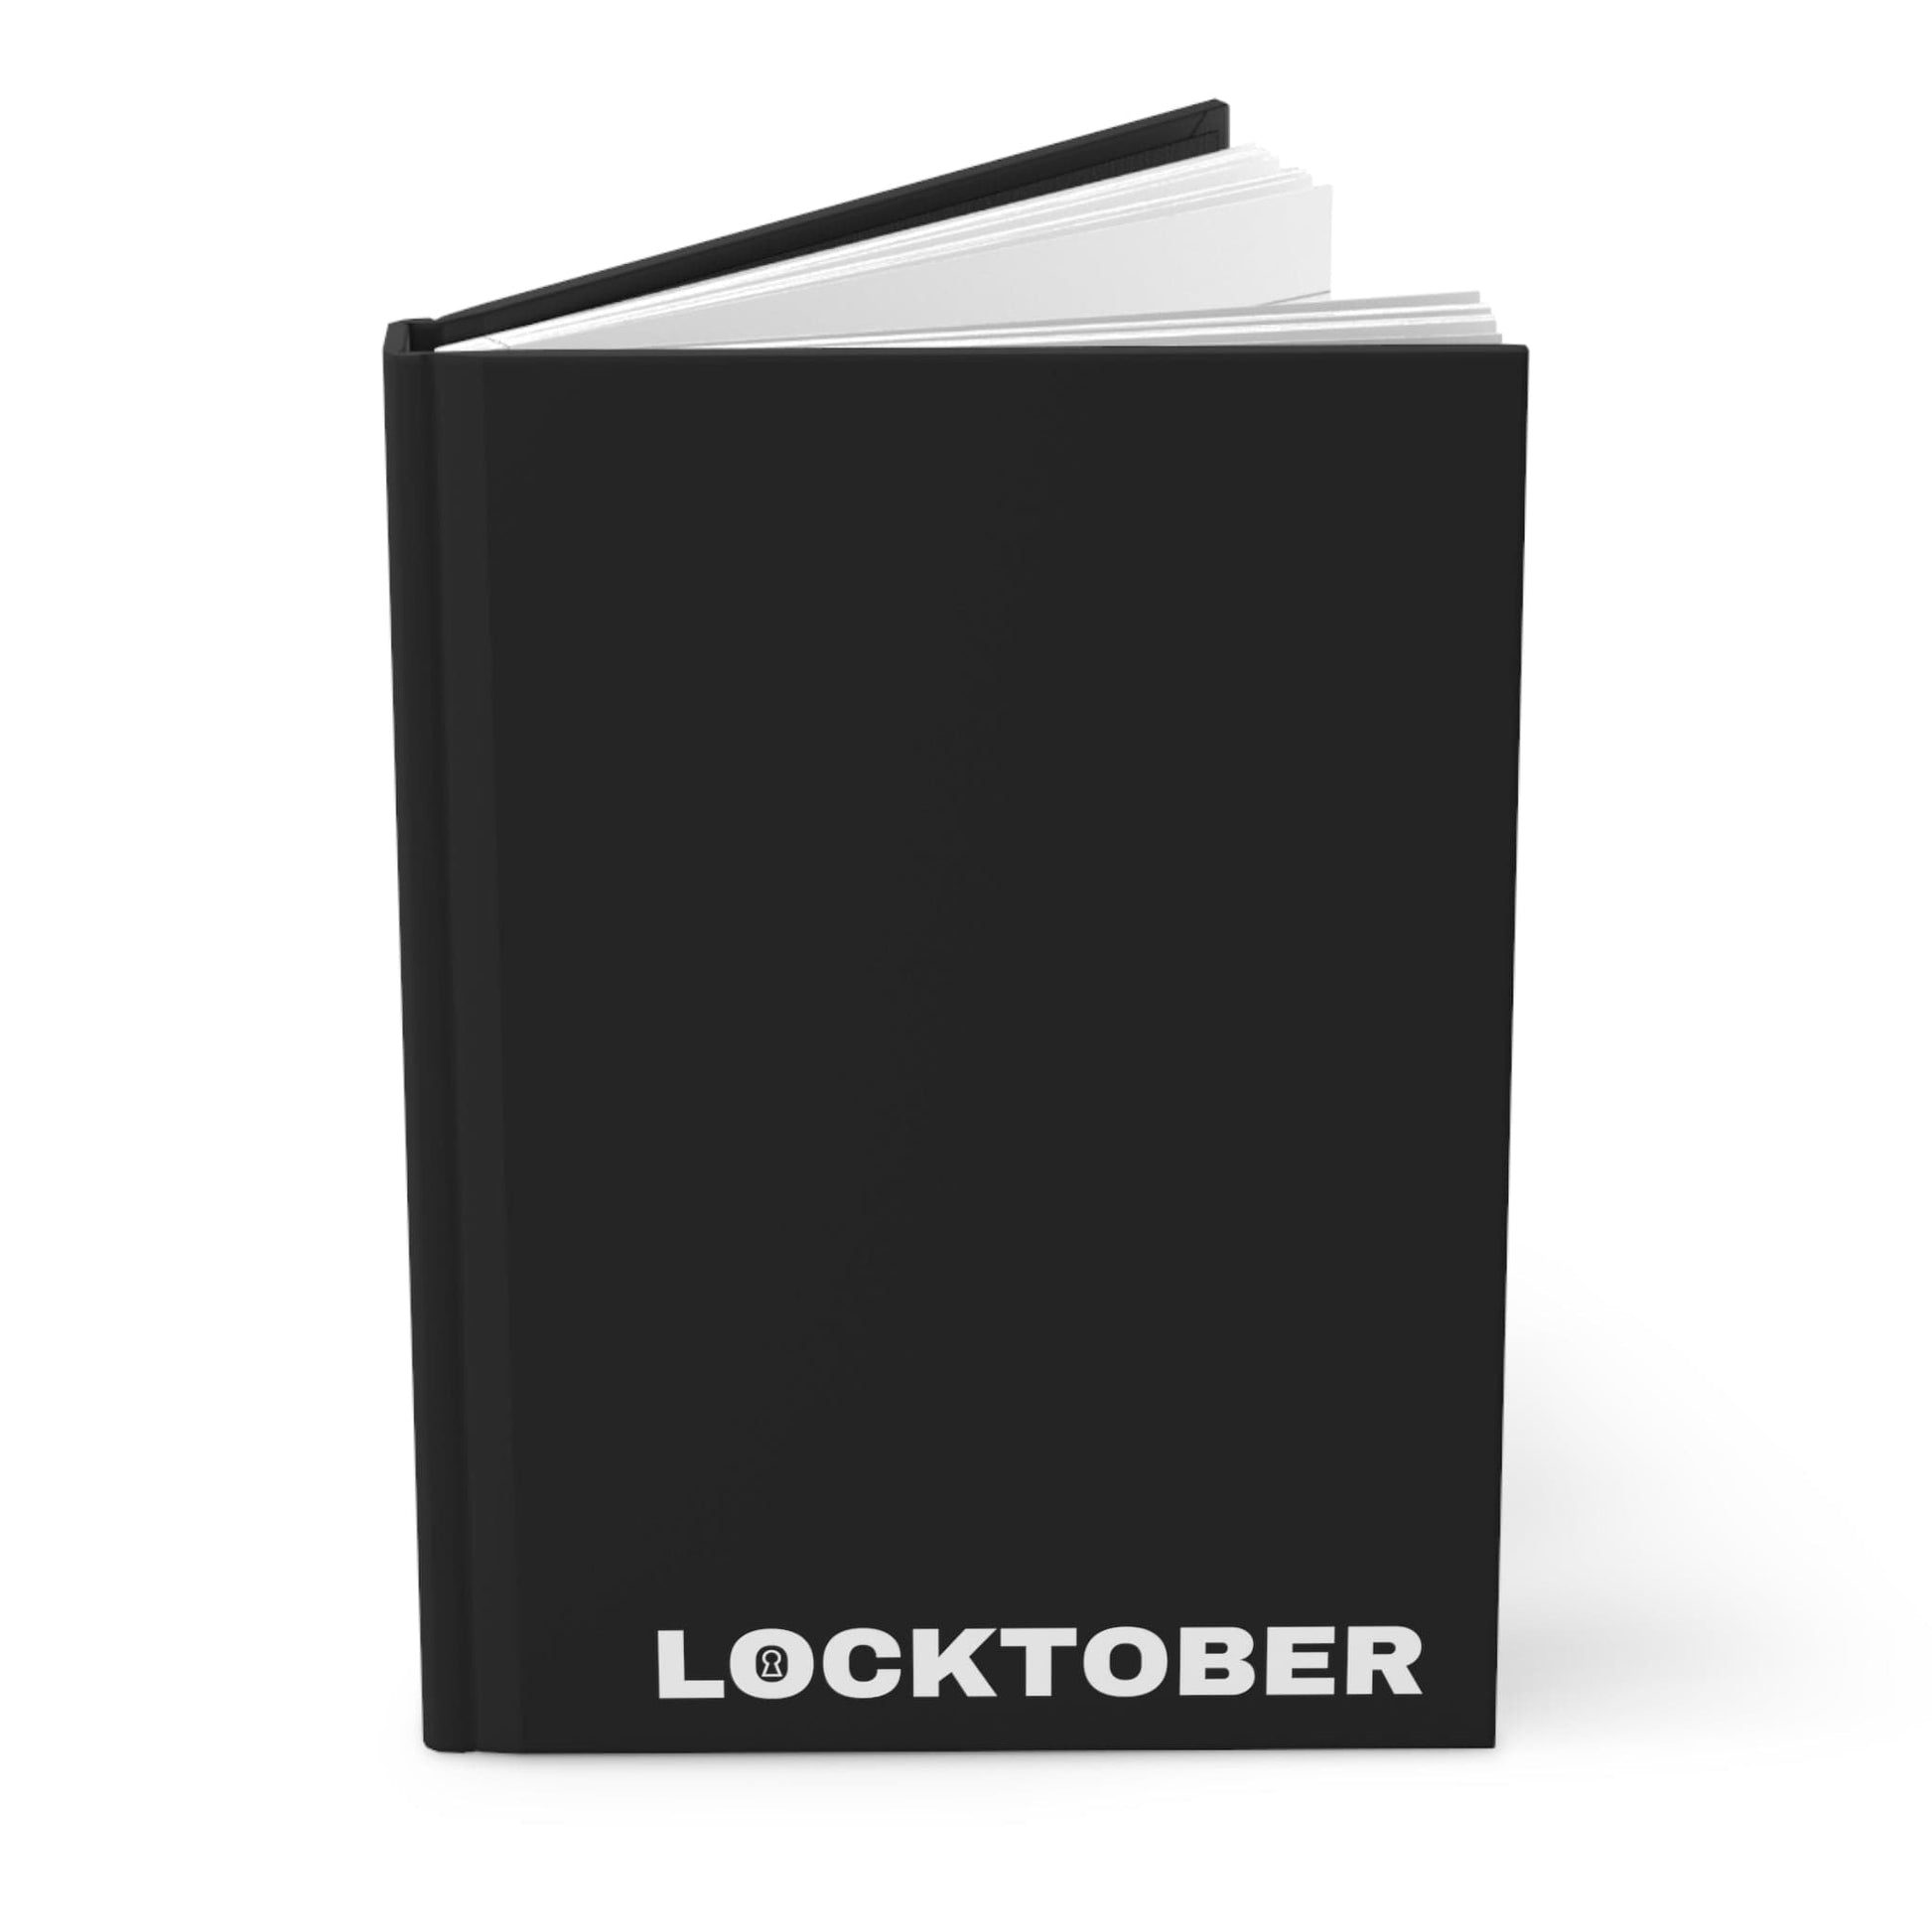 Paper products Journal Locktober 2023 Daily Journal - Volume #1 LEATHERDADDY BATOR